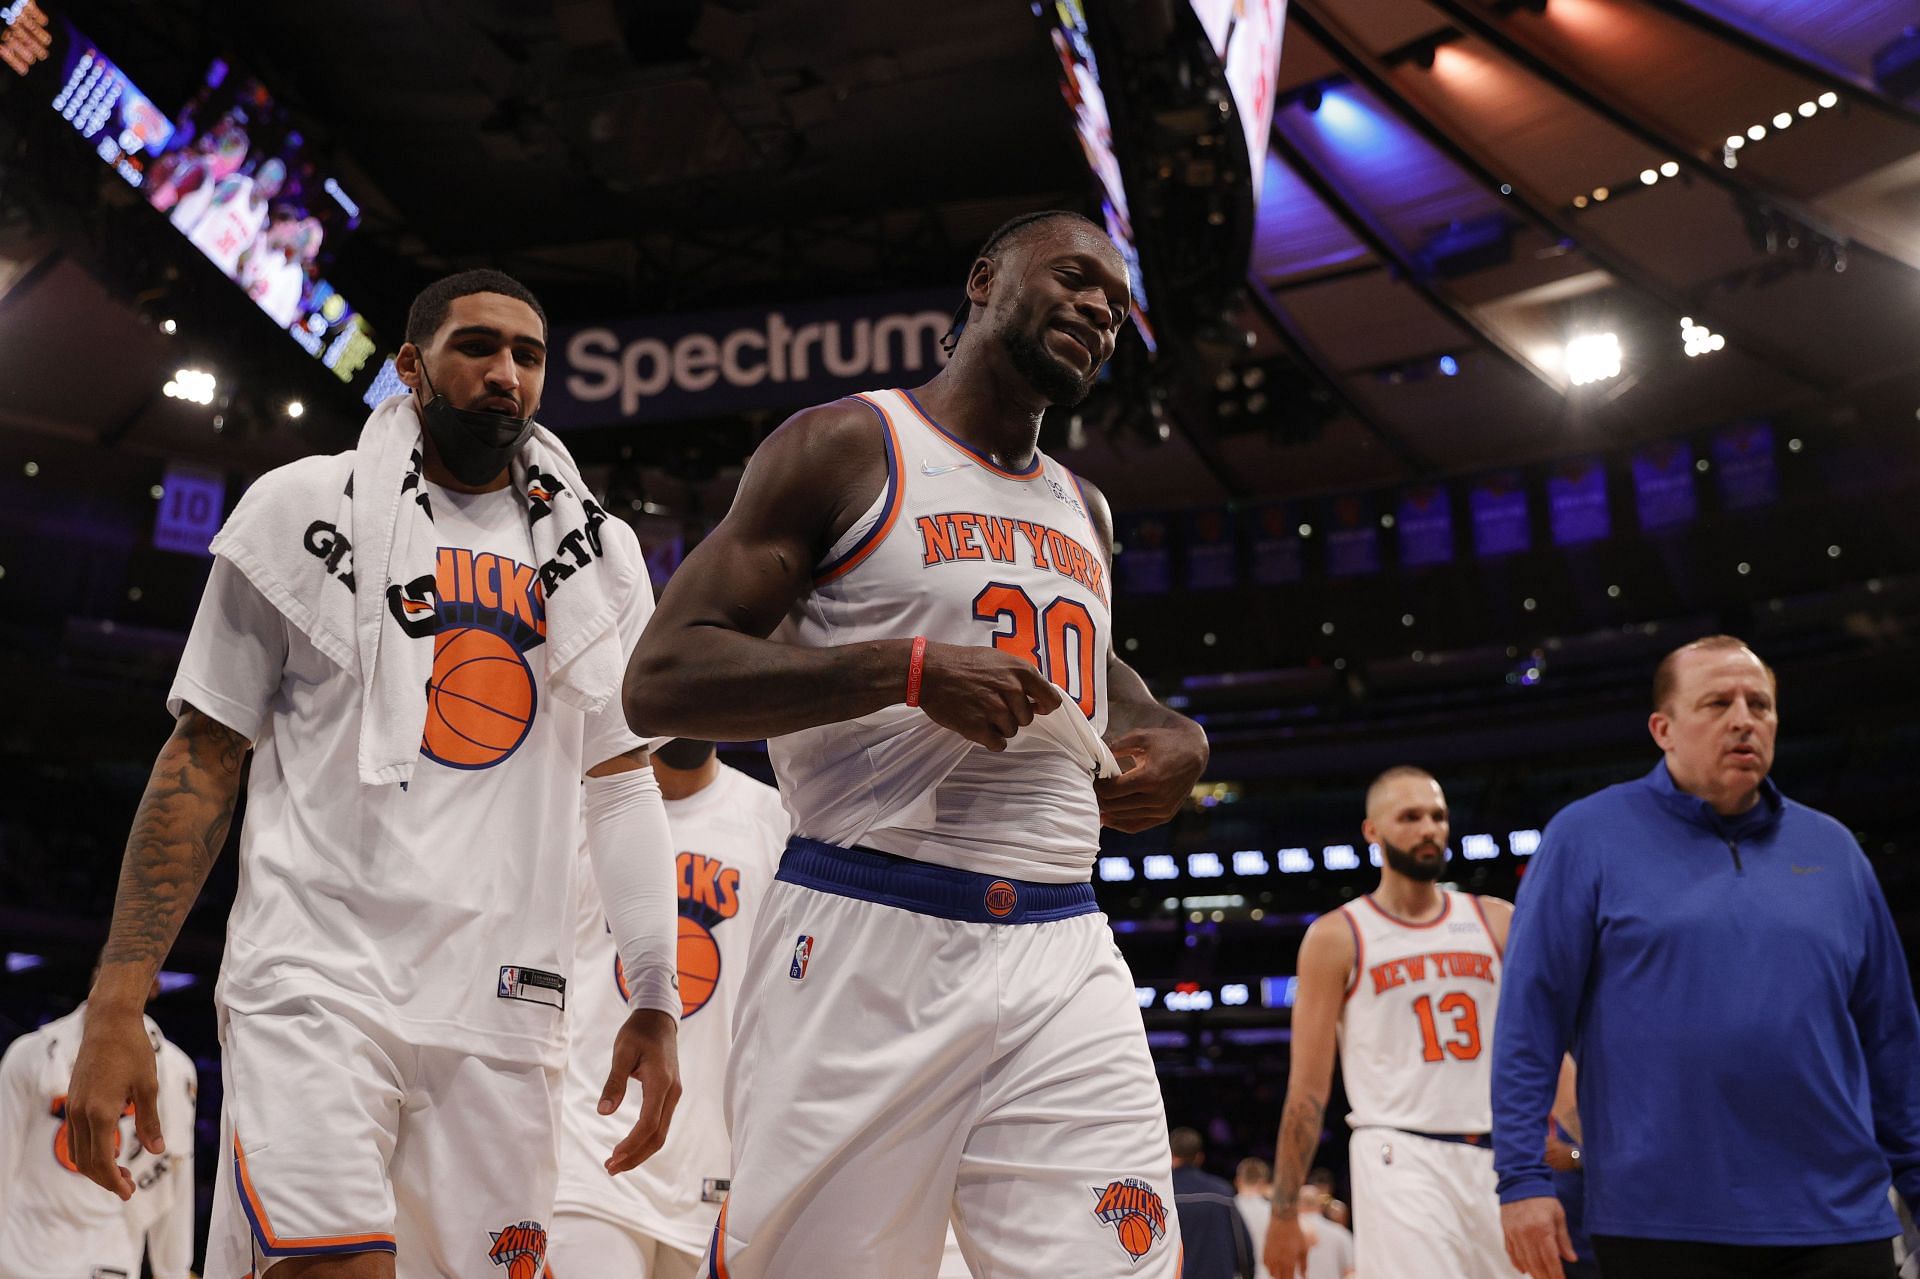 The New York Knicks walk away with a win against the Indiana Pacers